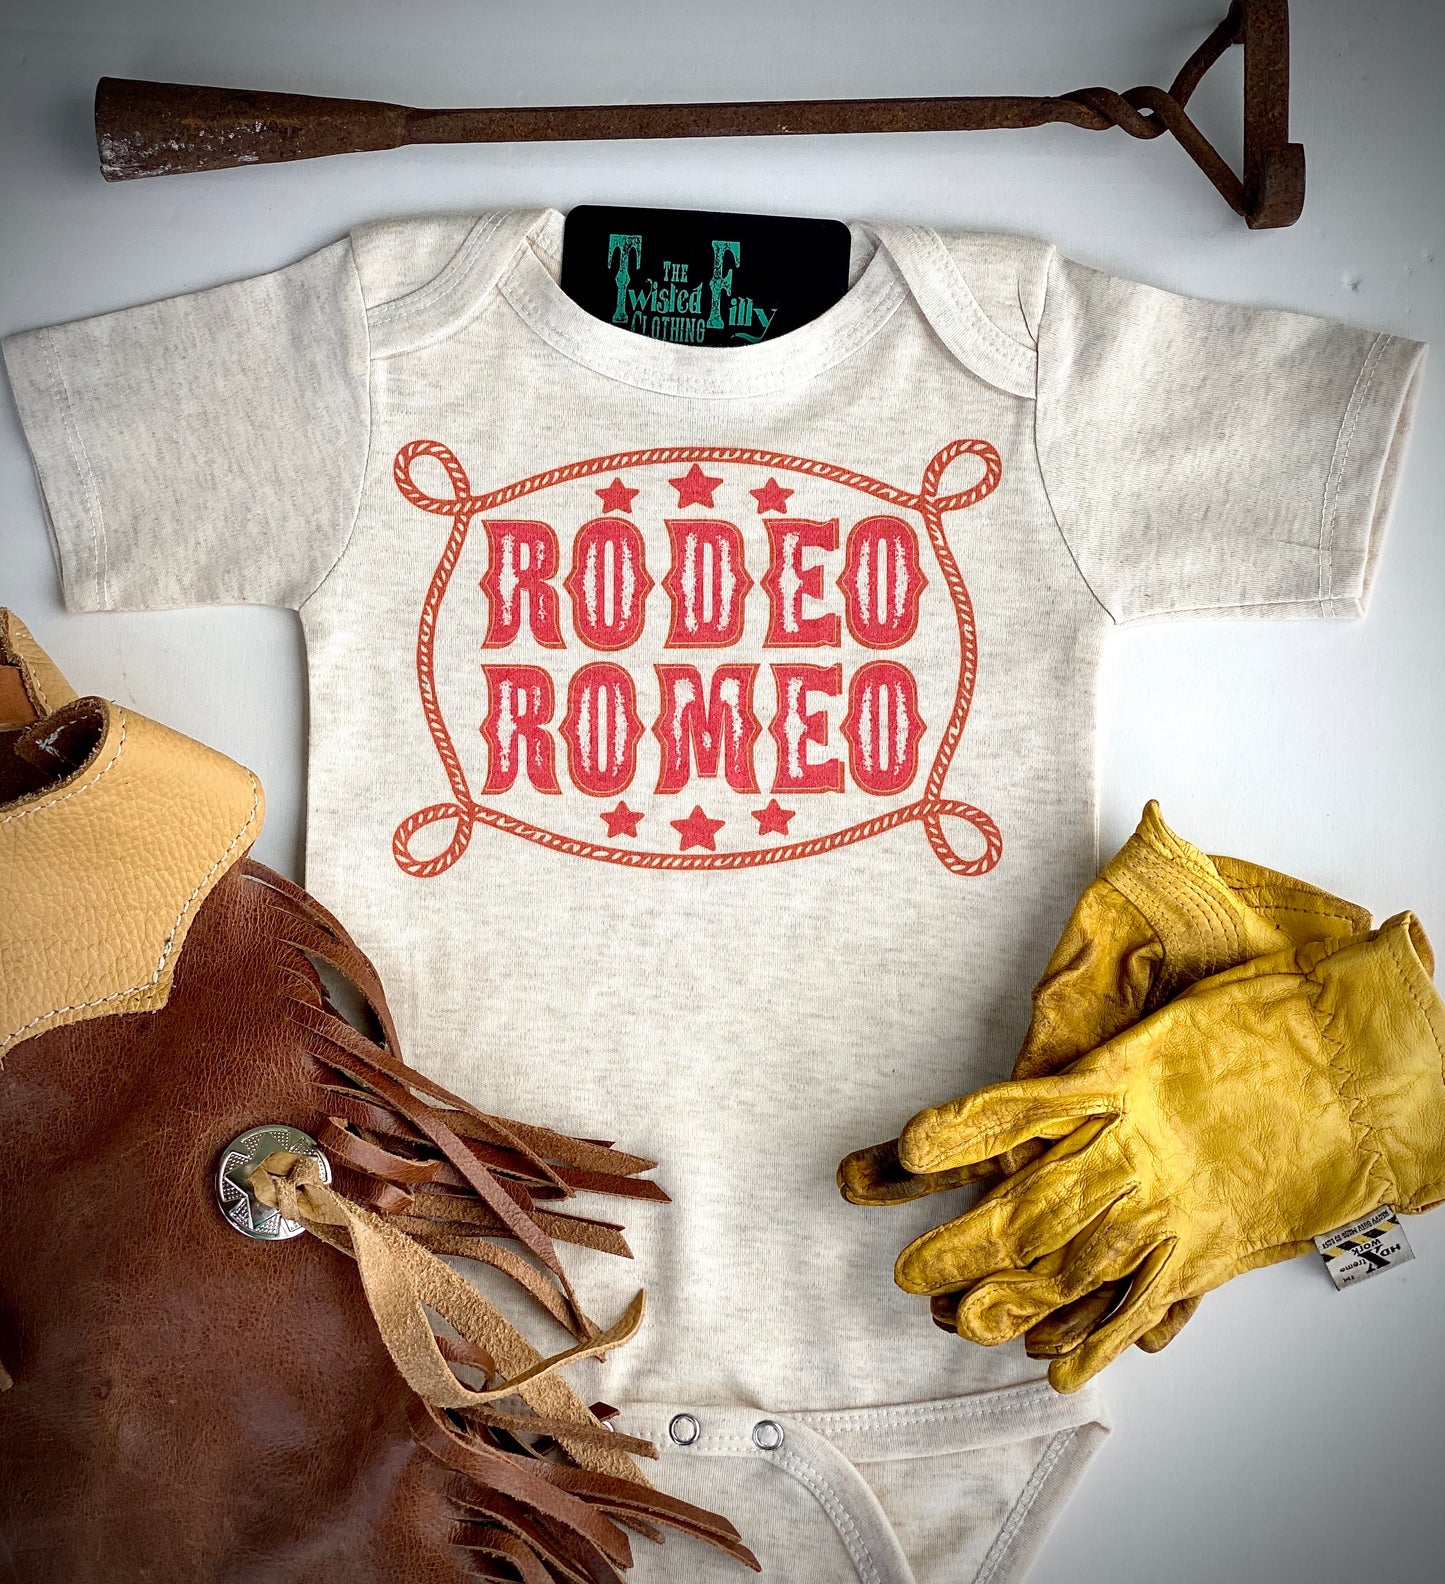 Rodeo Romeo - L/S Infant One Piece - Oatmeal